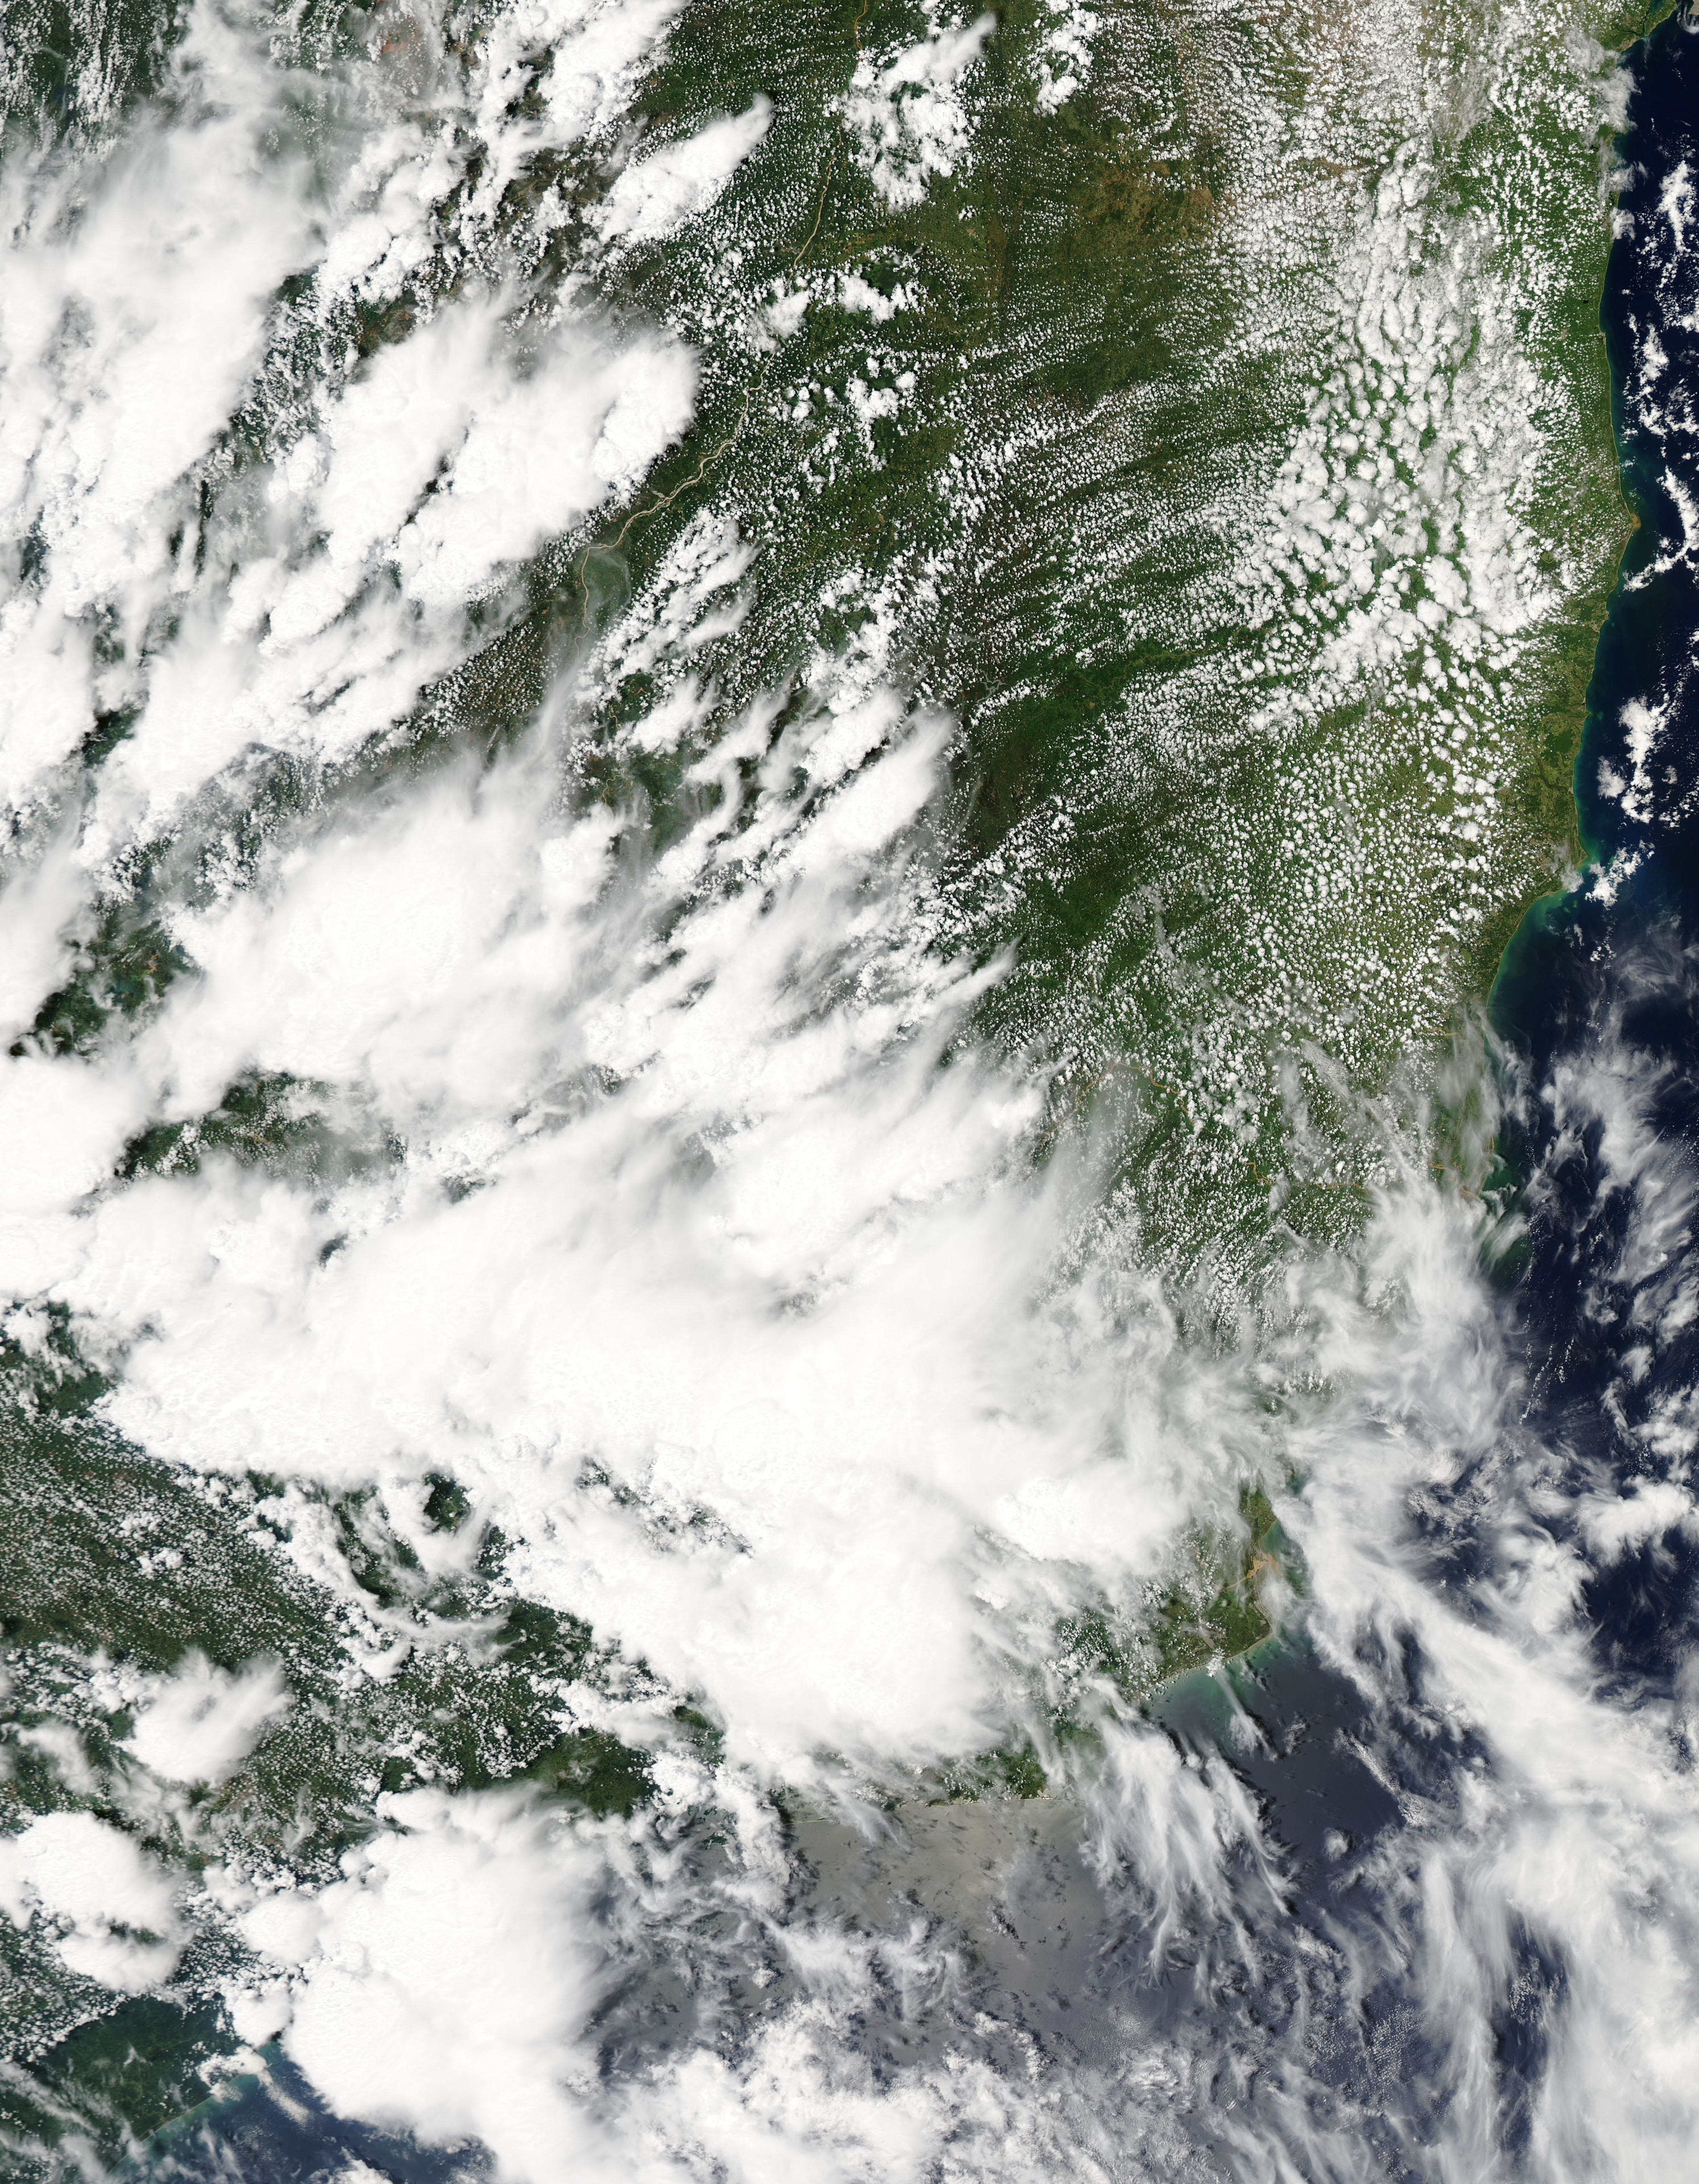 Flooding in Southeastern Brazil - related image preview